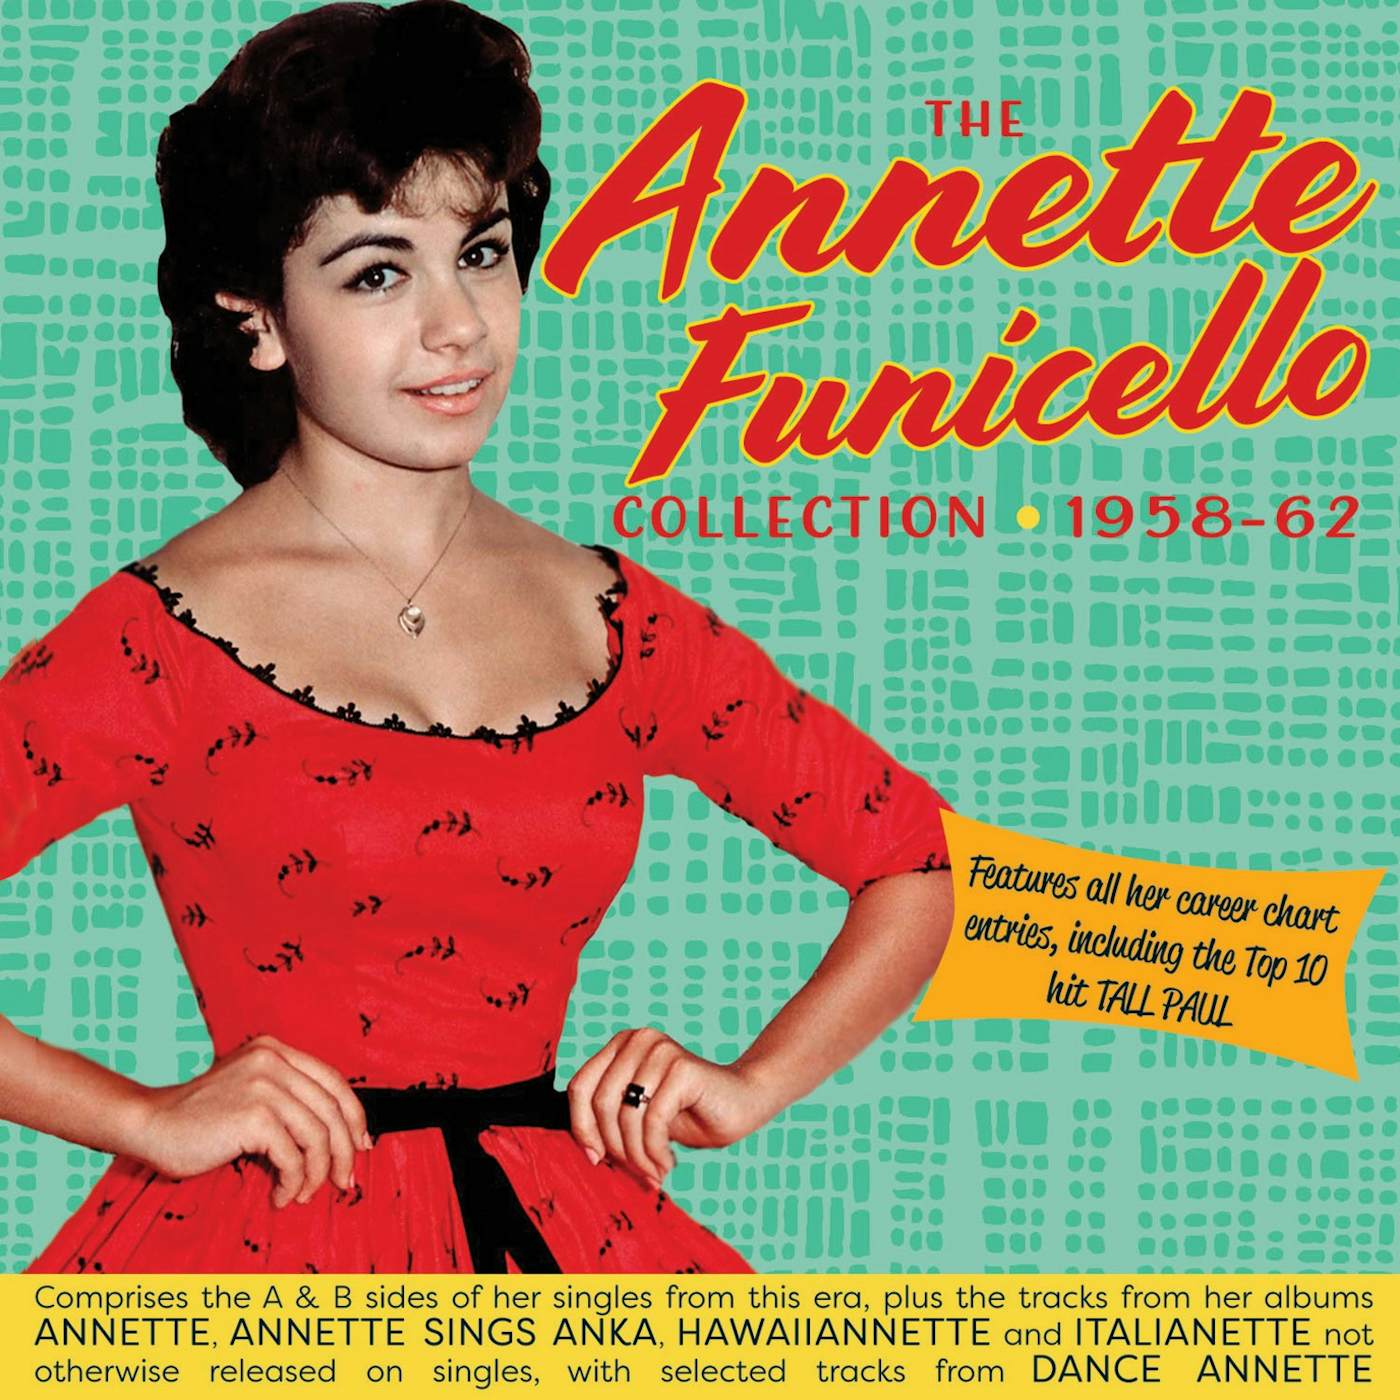 Annette Funicello SINGLES & ALBUMS COLLECTION 1958-62 CD